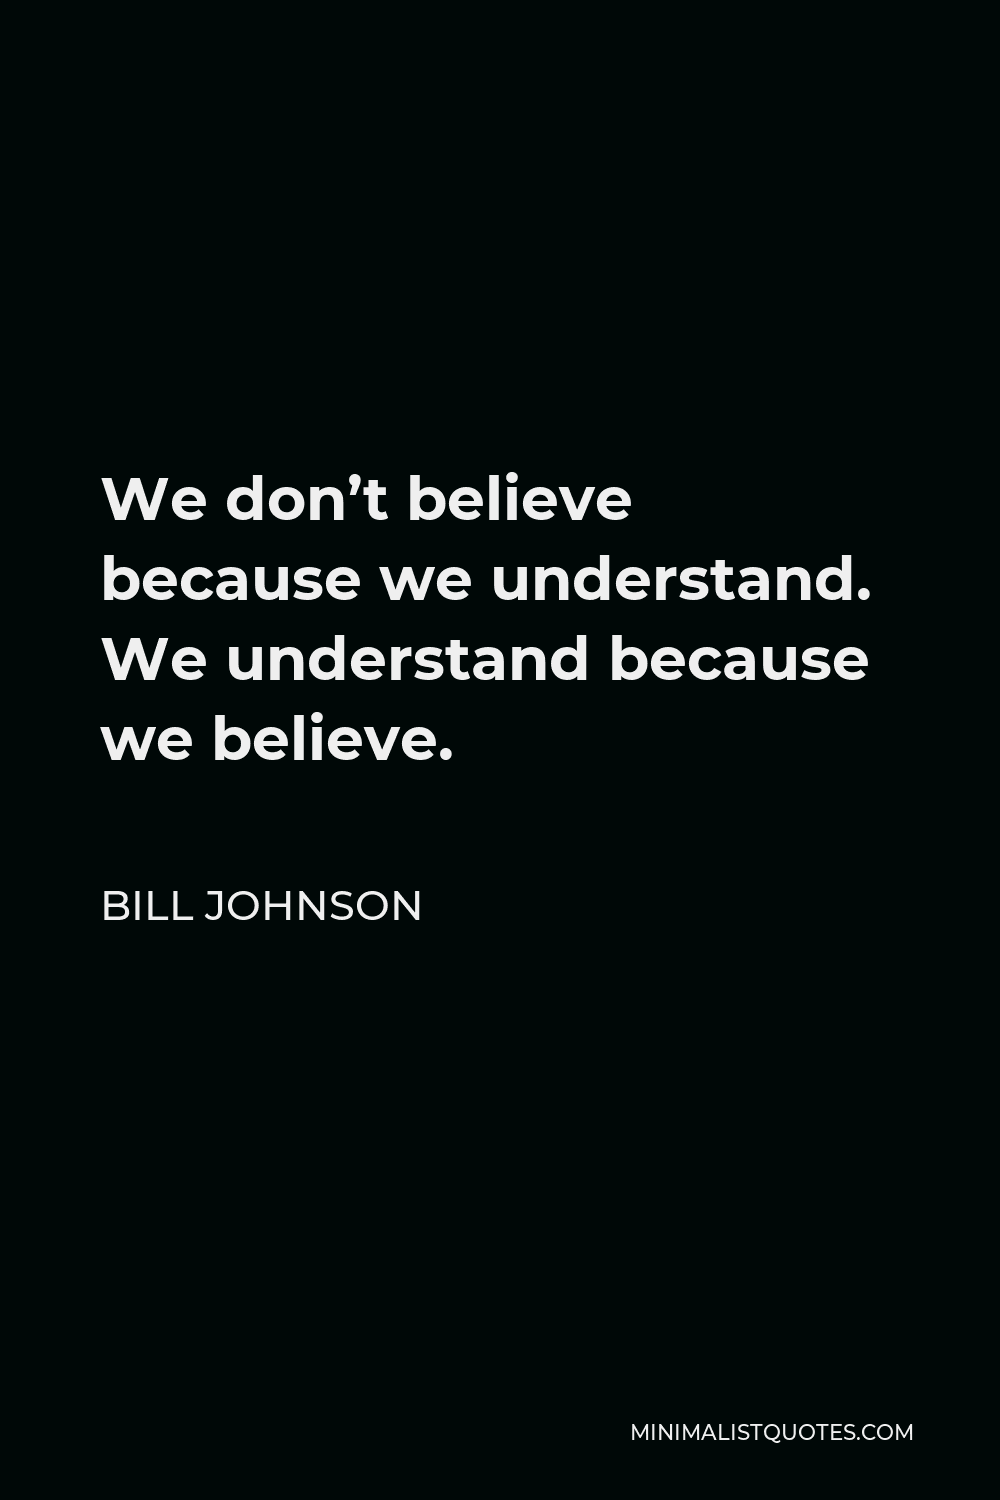 Bill Johnson Quote We don't believe because we understand. We